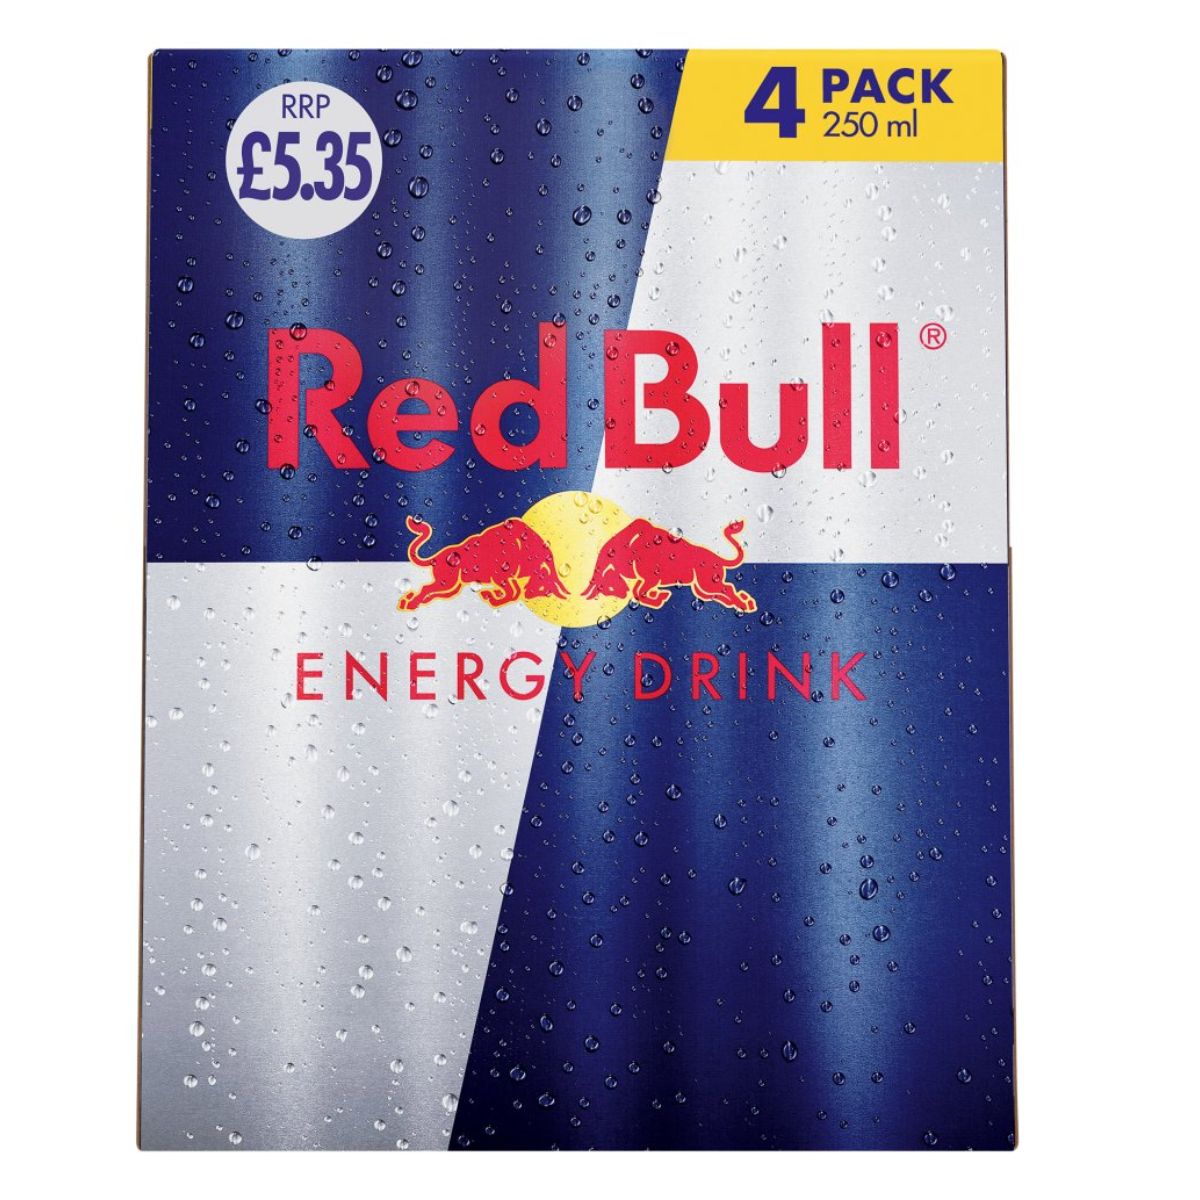 A Red Bull - Energy Drink - 4 x 250ml, priced at £5.35, featuring the logo and water droplets on the blue and silver packaging.